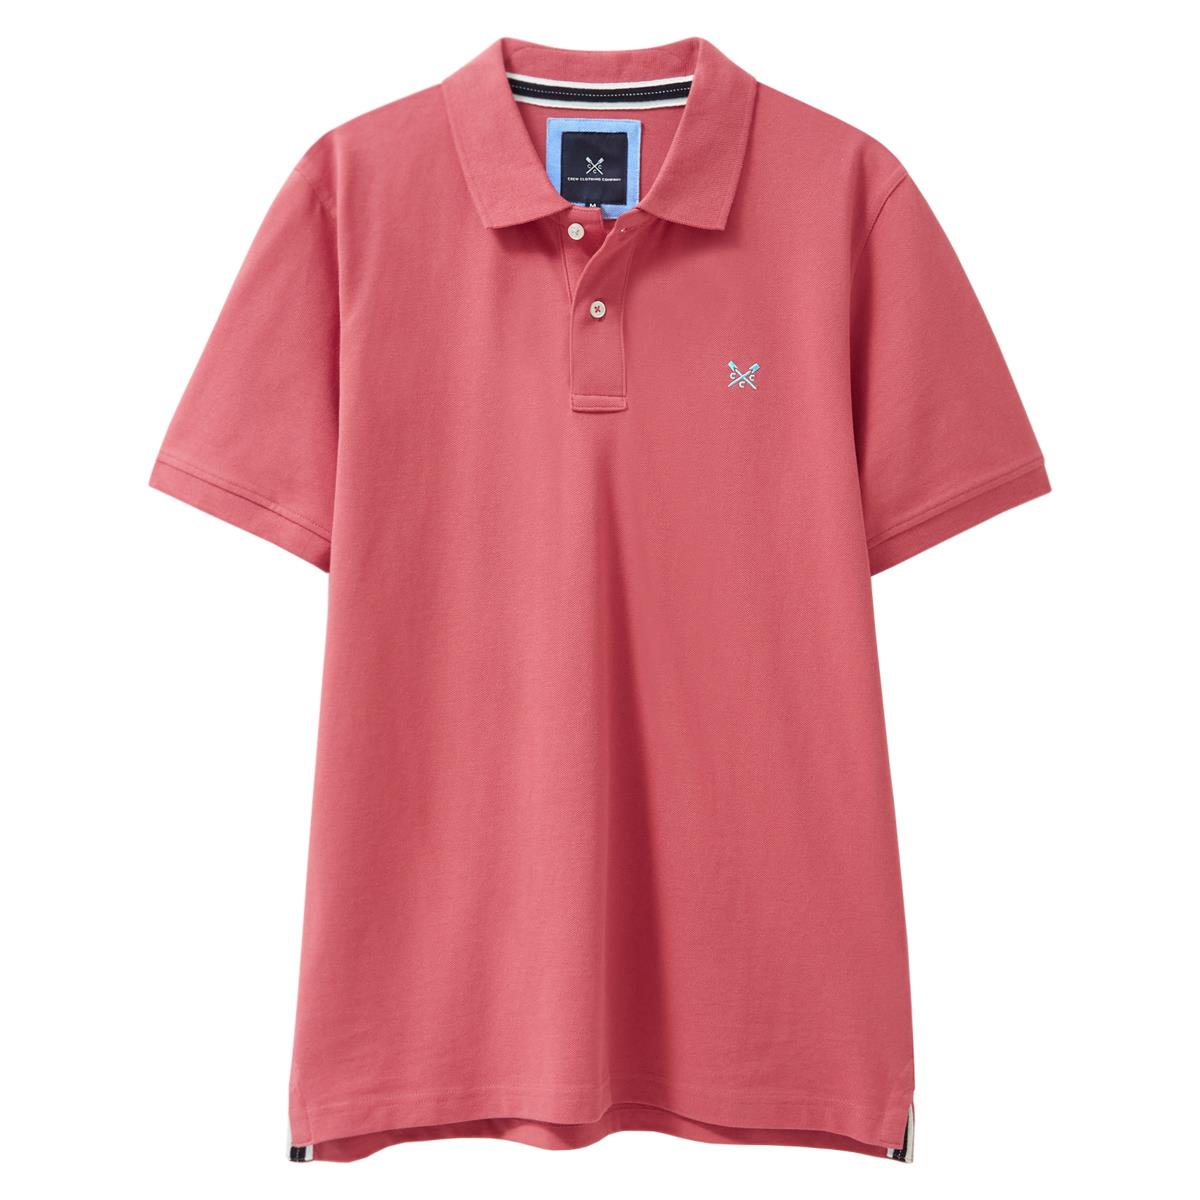 Can crew polo shirts be safely machine washed?